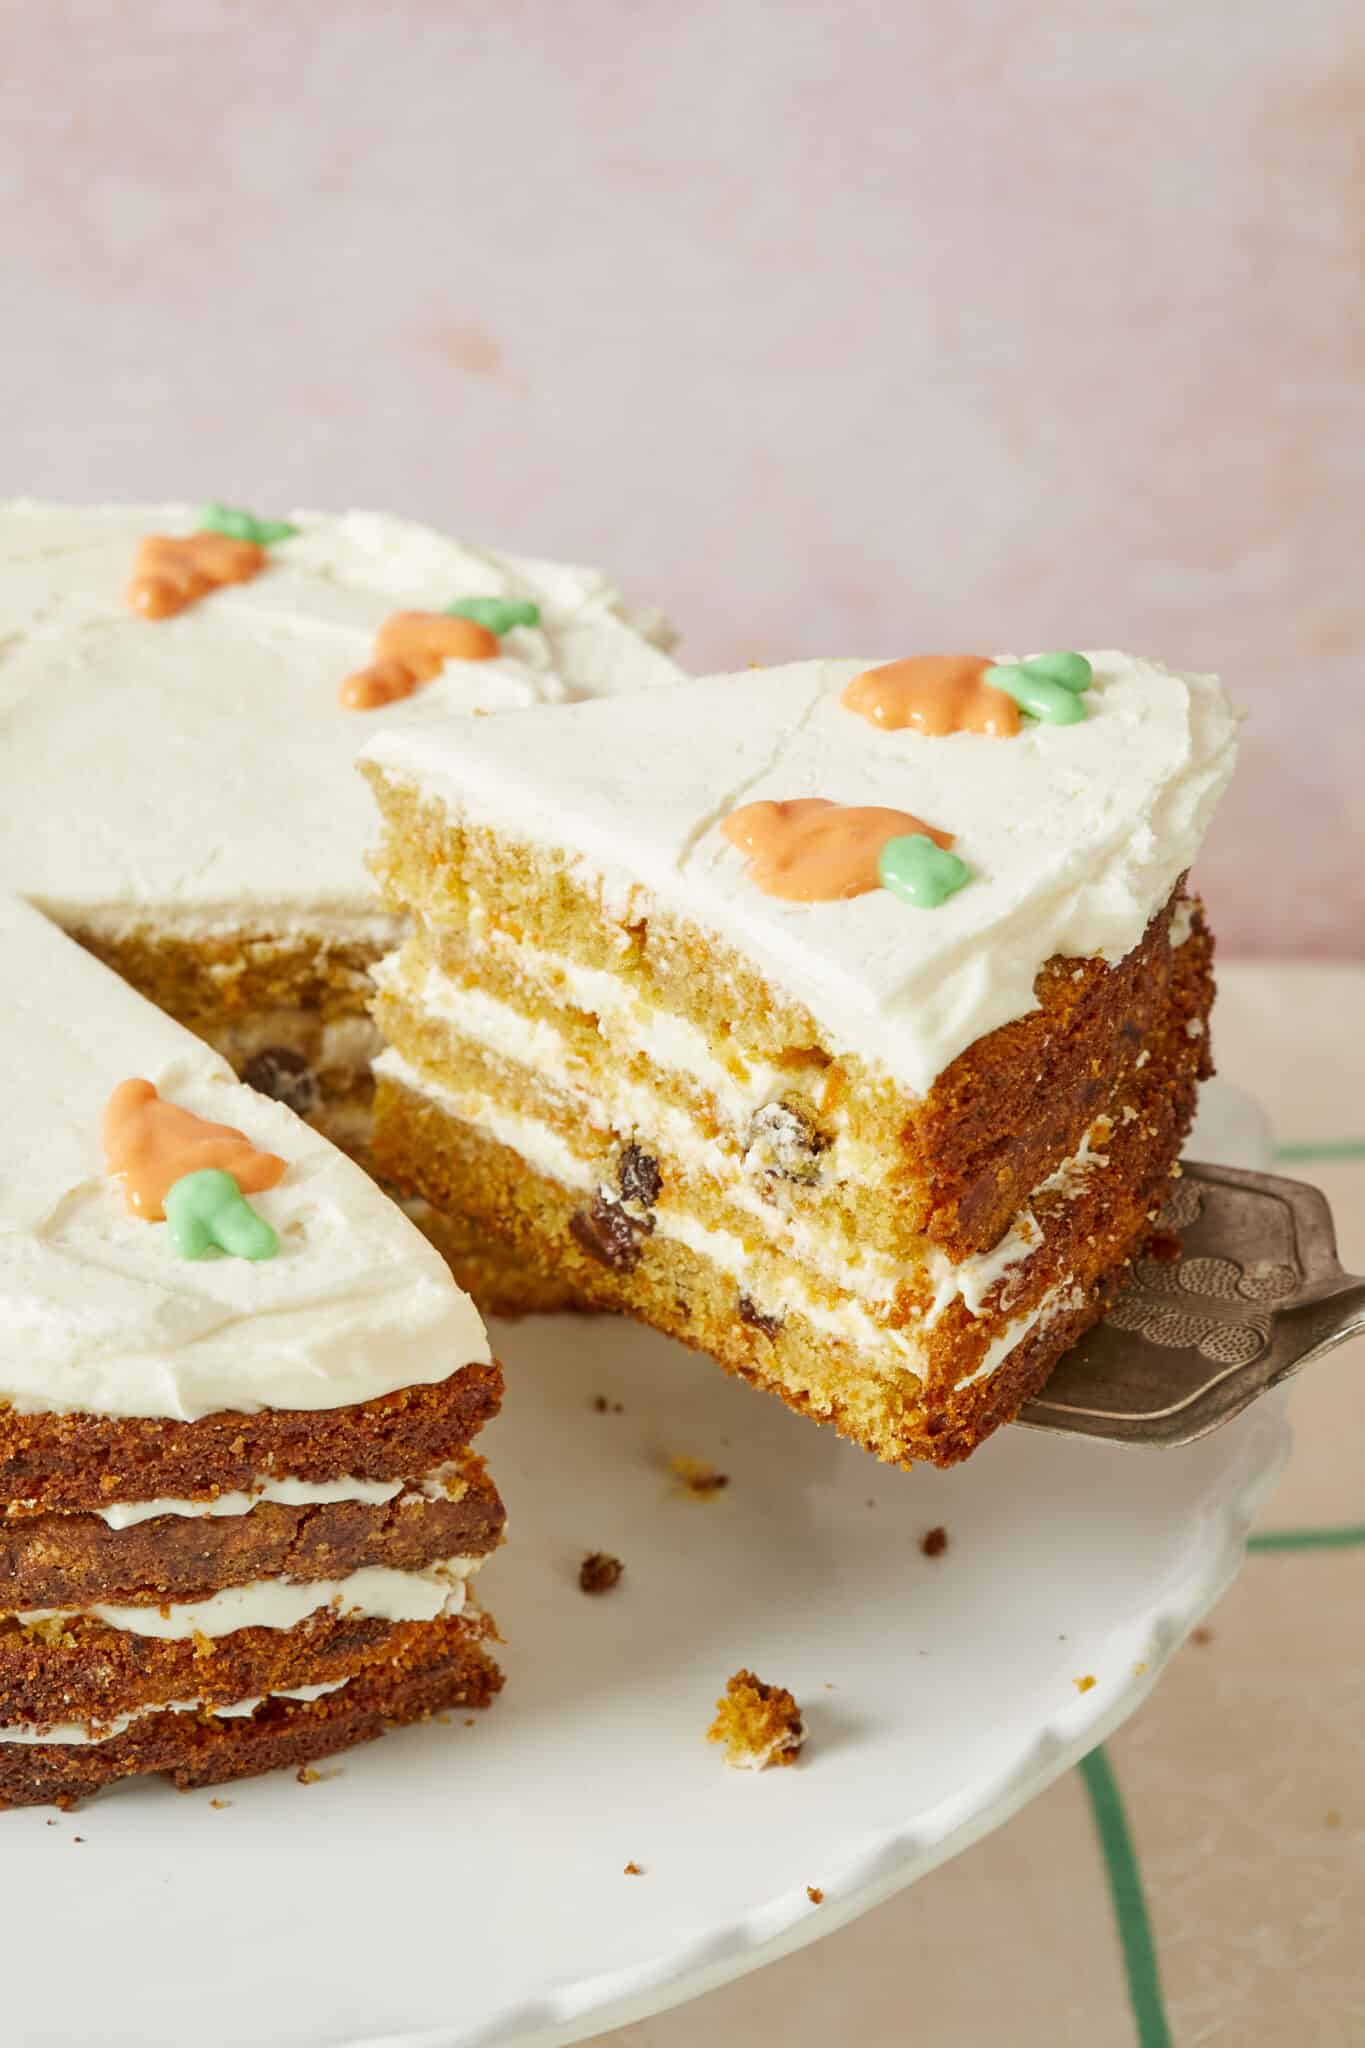 A slice of Best-Ever Carrot Cake has been cut and is being lifted with a serving spatula. The cakes moist and loaded with raisins, layered in between and covered with cream cheese frosting. 